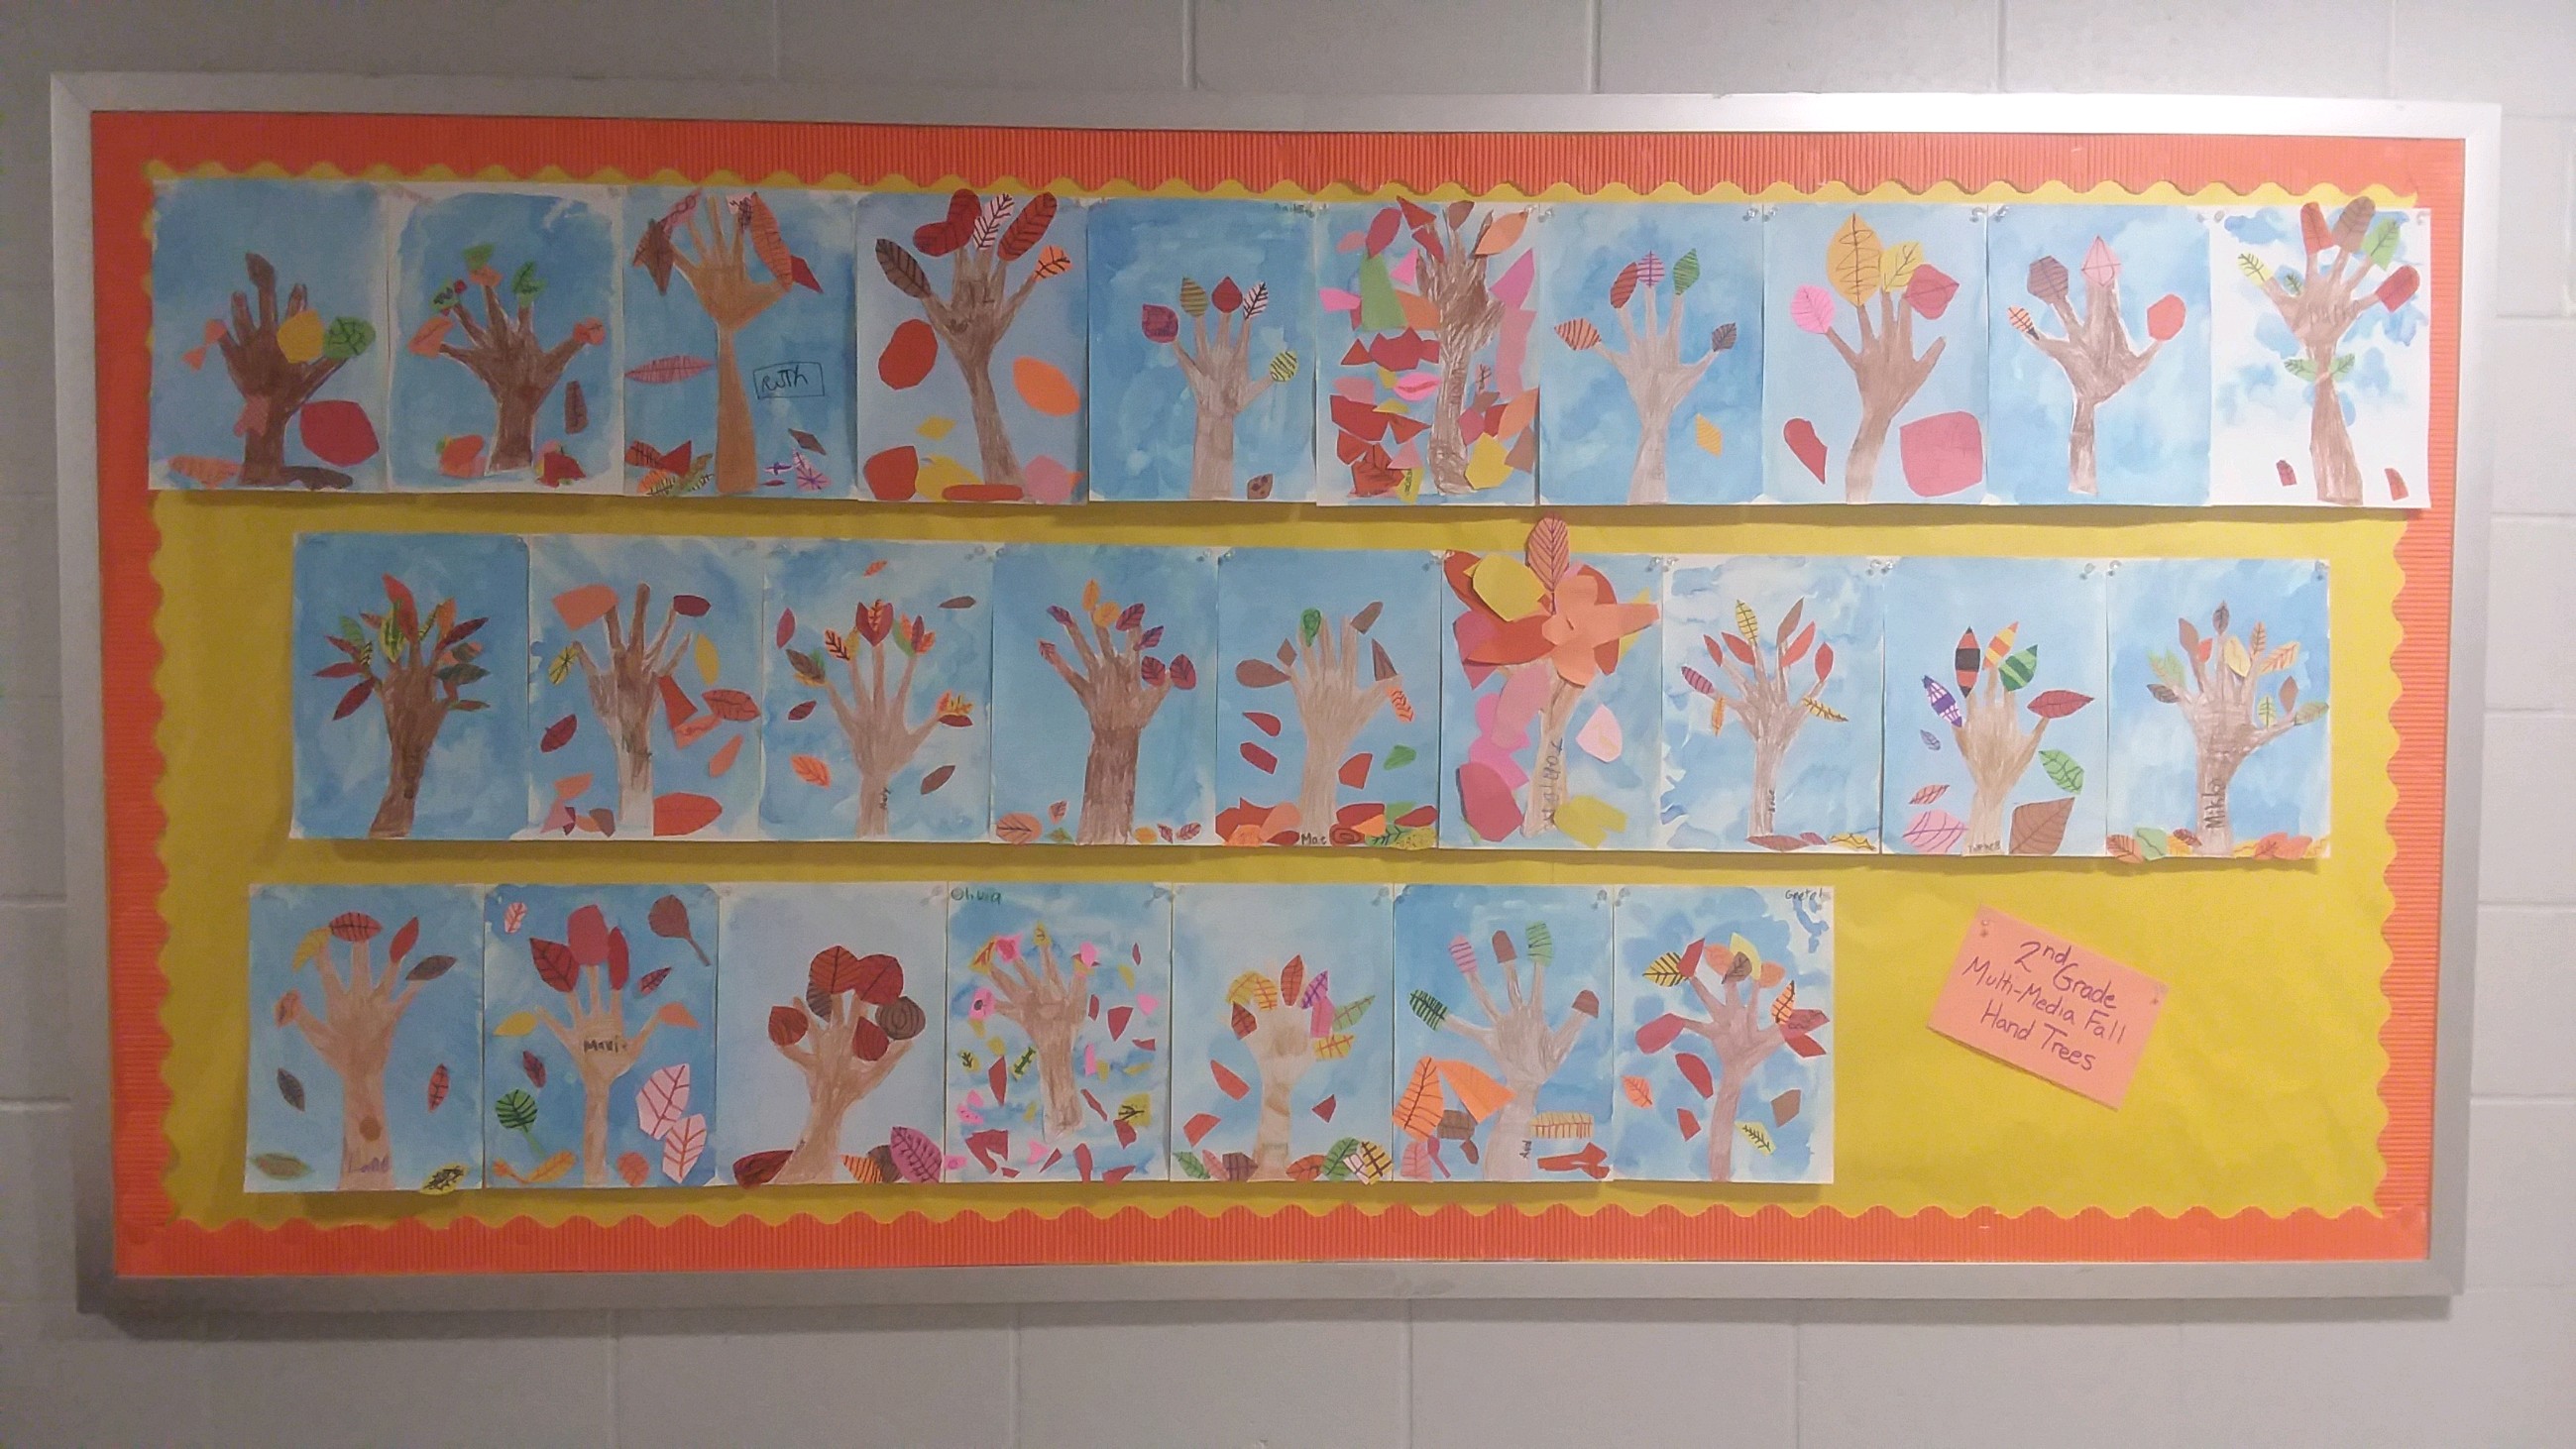 Second grade students spent several class periods making these multi-media fall trees.